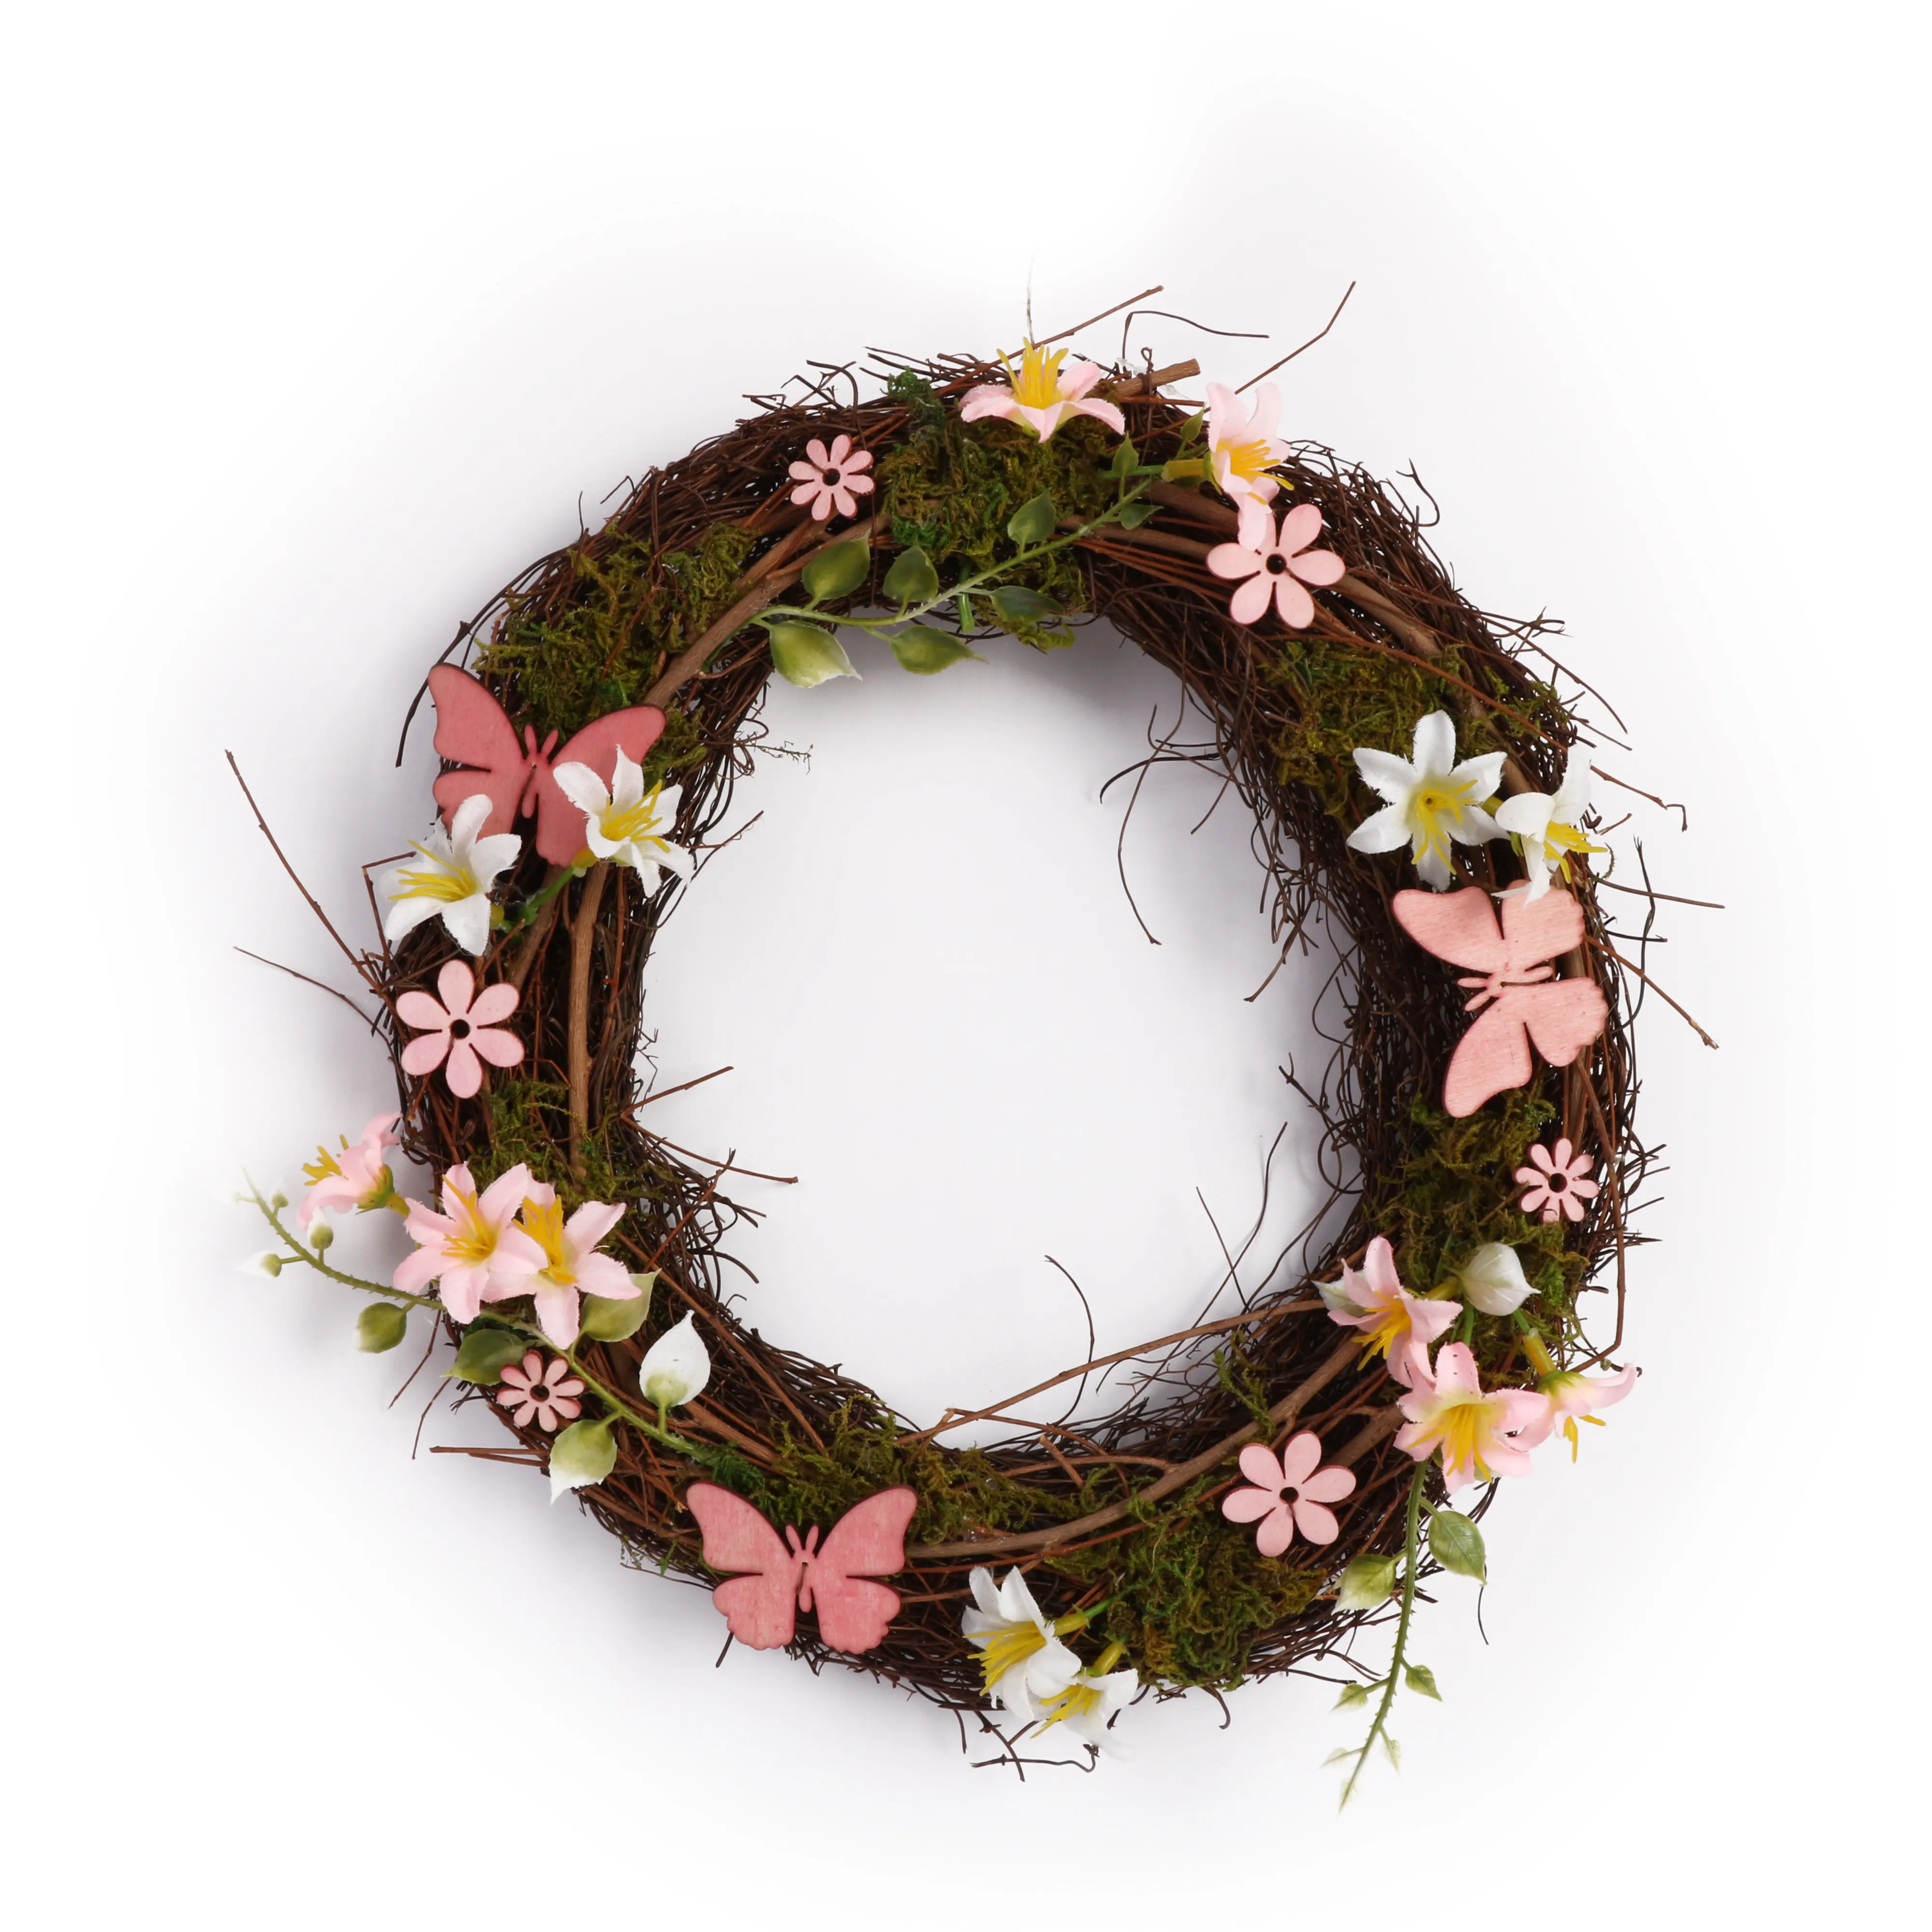 Round Natural Rattan Ring Christmas Garland Hanging Ornament DIY Floral Wreath Wedding Decoration Home Decor